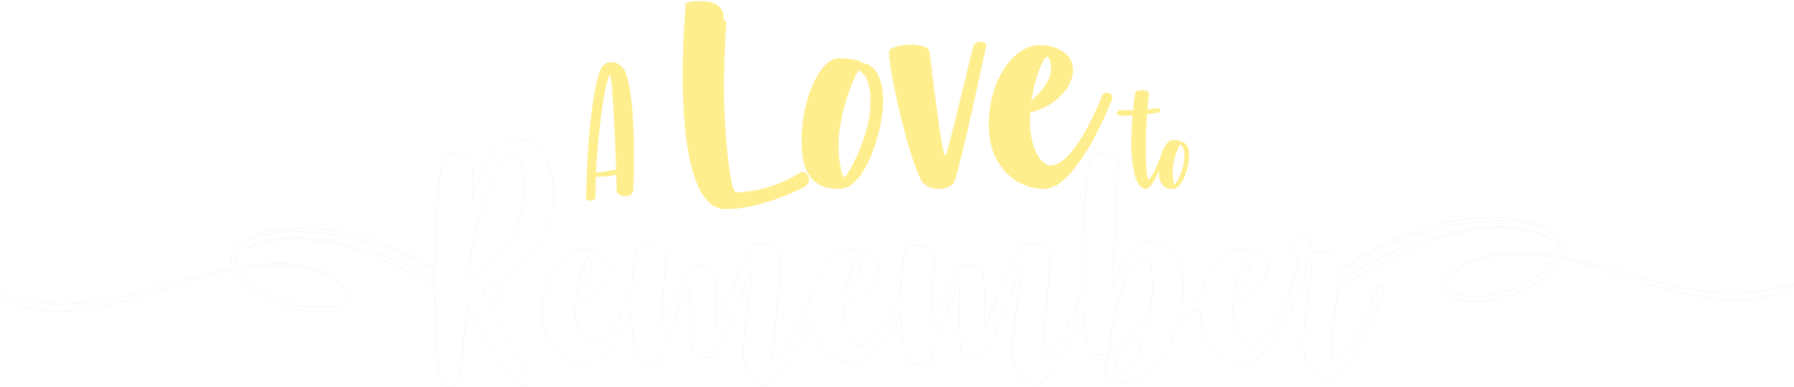 A Love to Remember logo